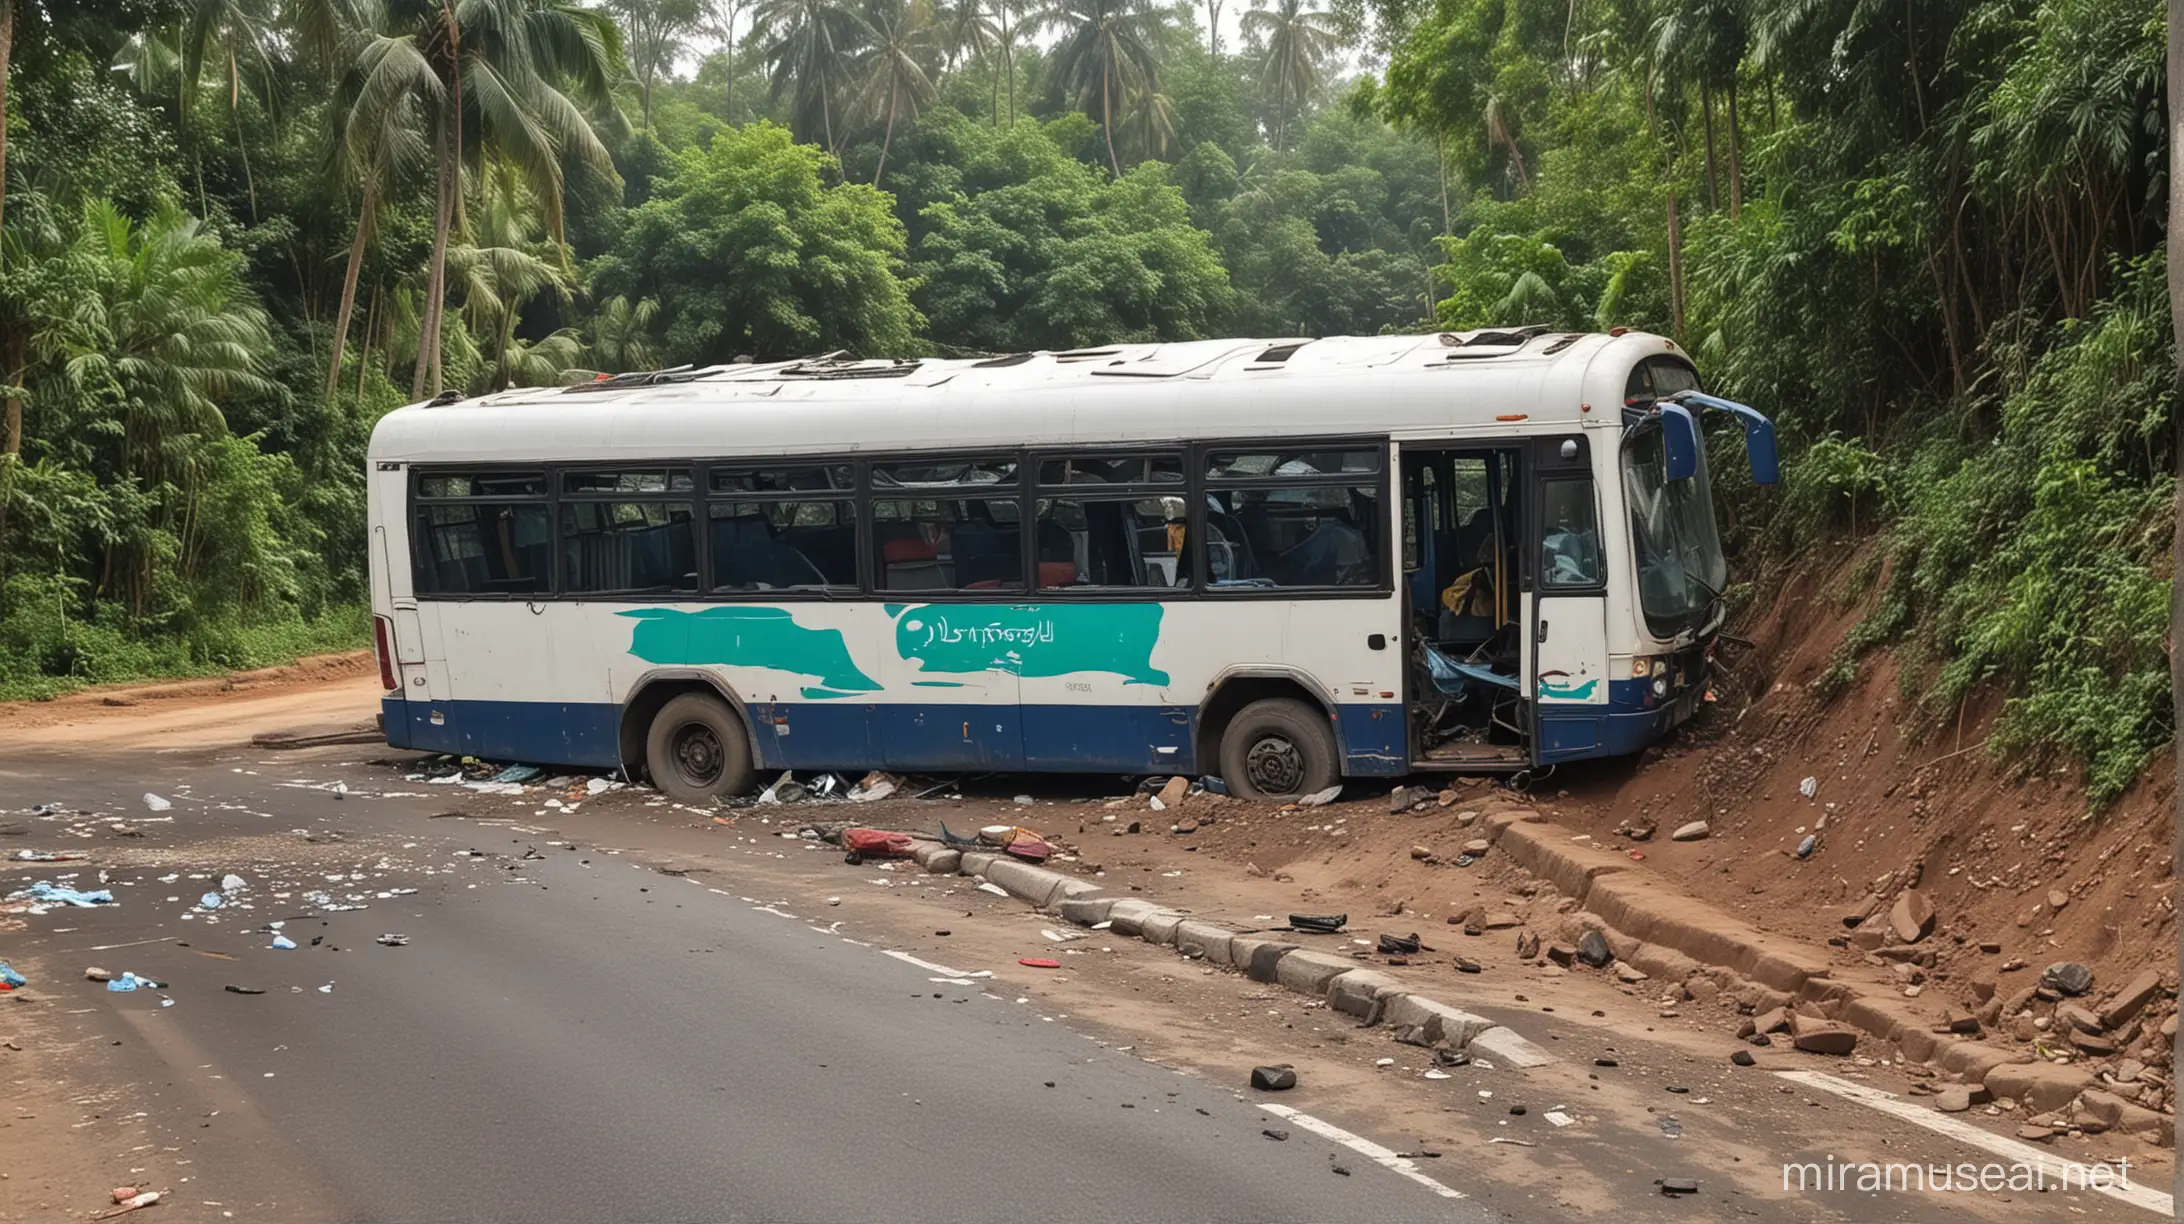 Detailed Scene of Bus Accident on Village Road in India